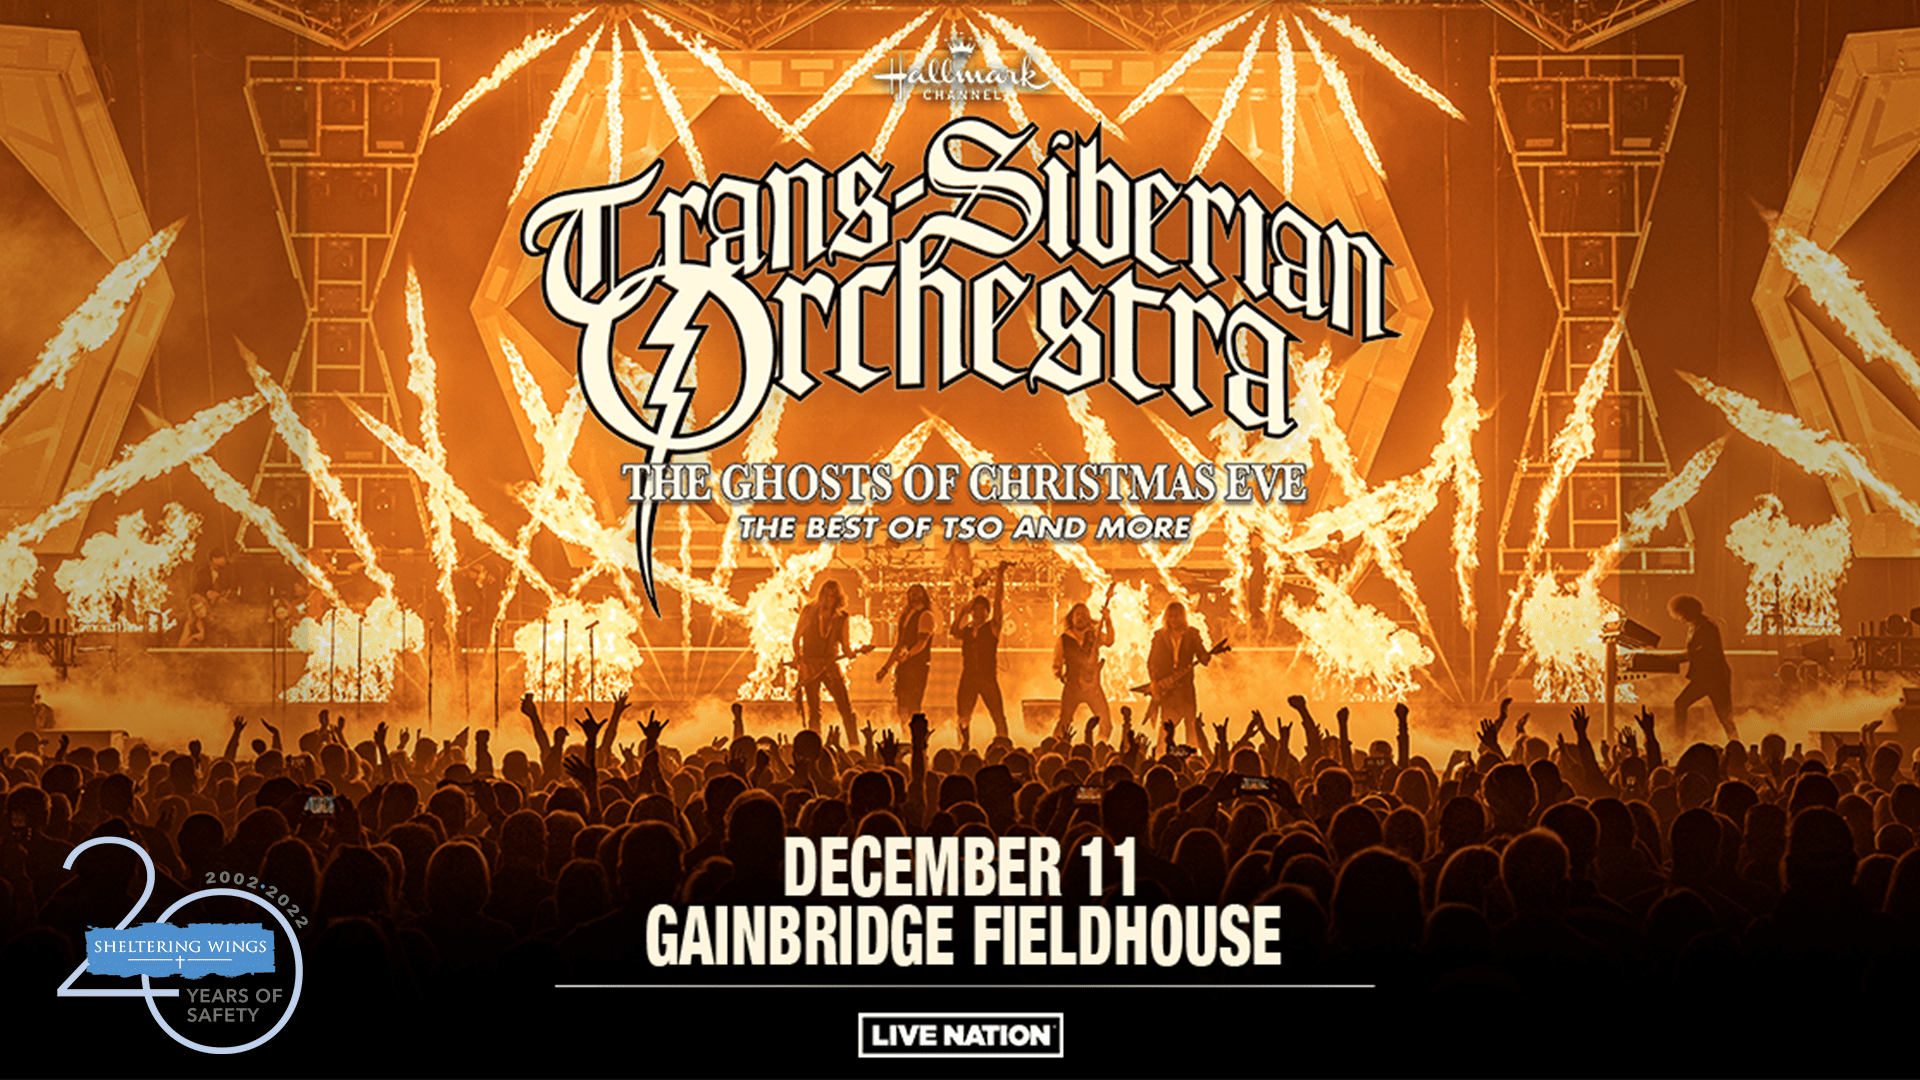 Trans-Siberian Orchestra at Gainbridge Fieldhouse Partnering with Sheltering WIngs